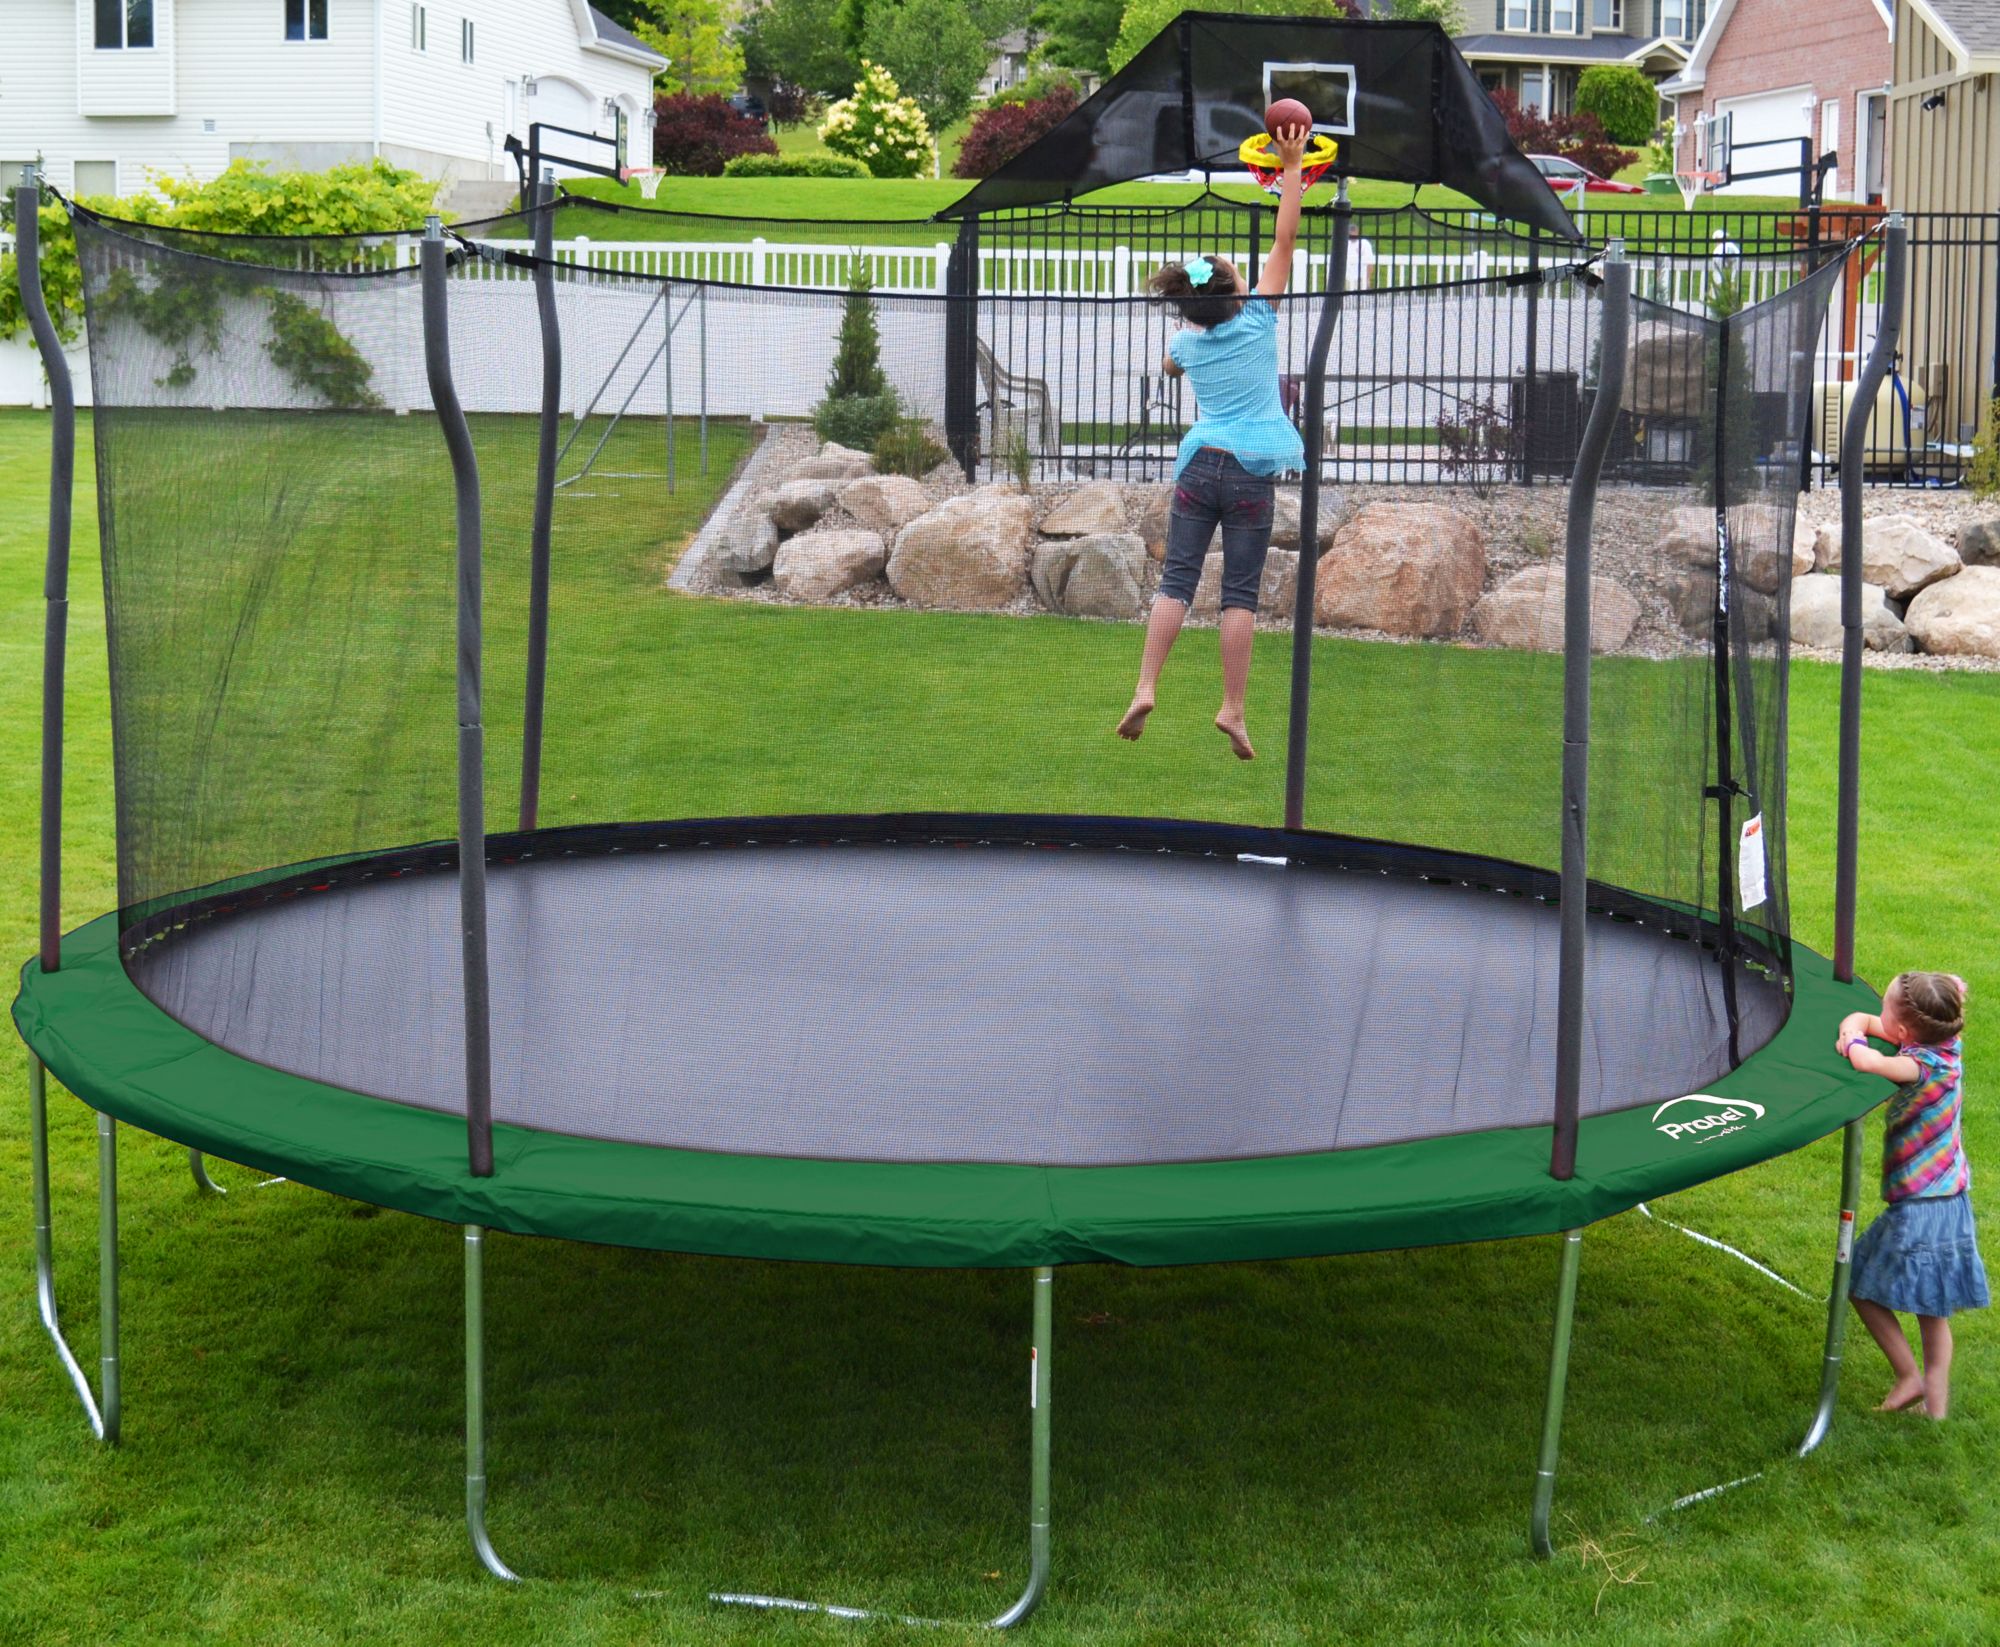 Propel Trampolines 15' Round Trampoline and Detachable Basketball Hoop, Mister and Enclosure - Green